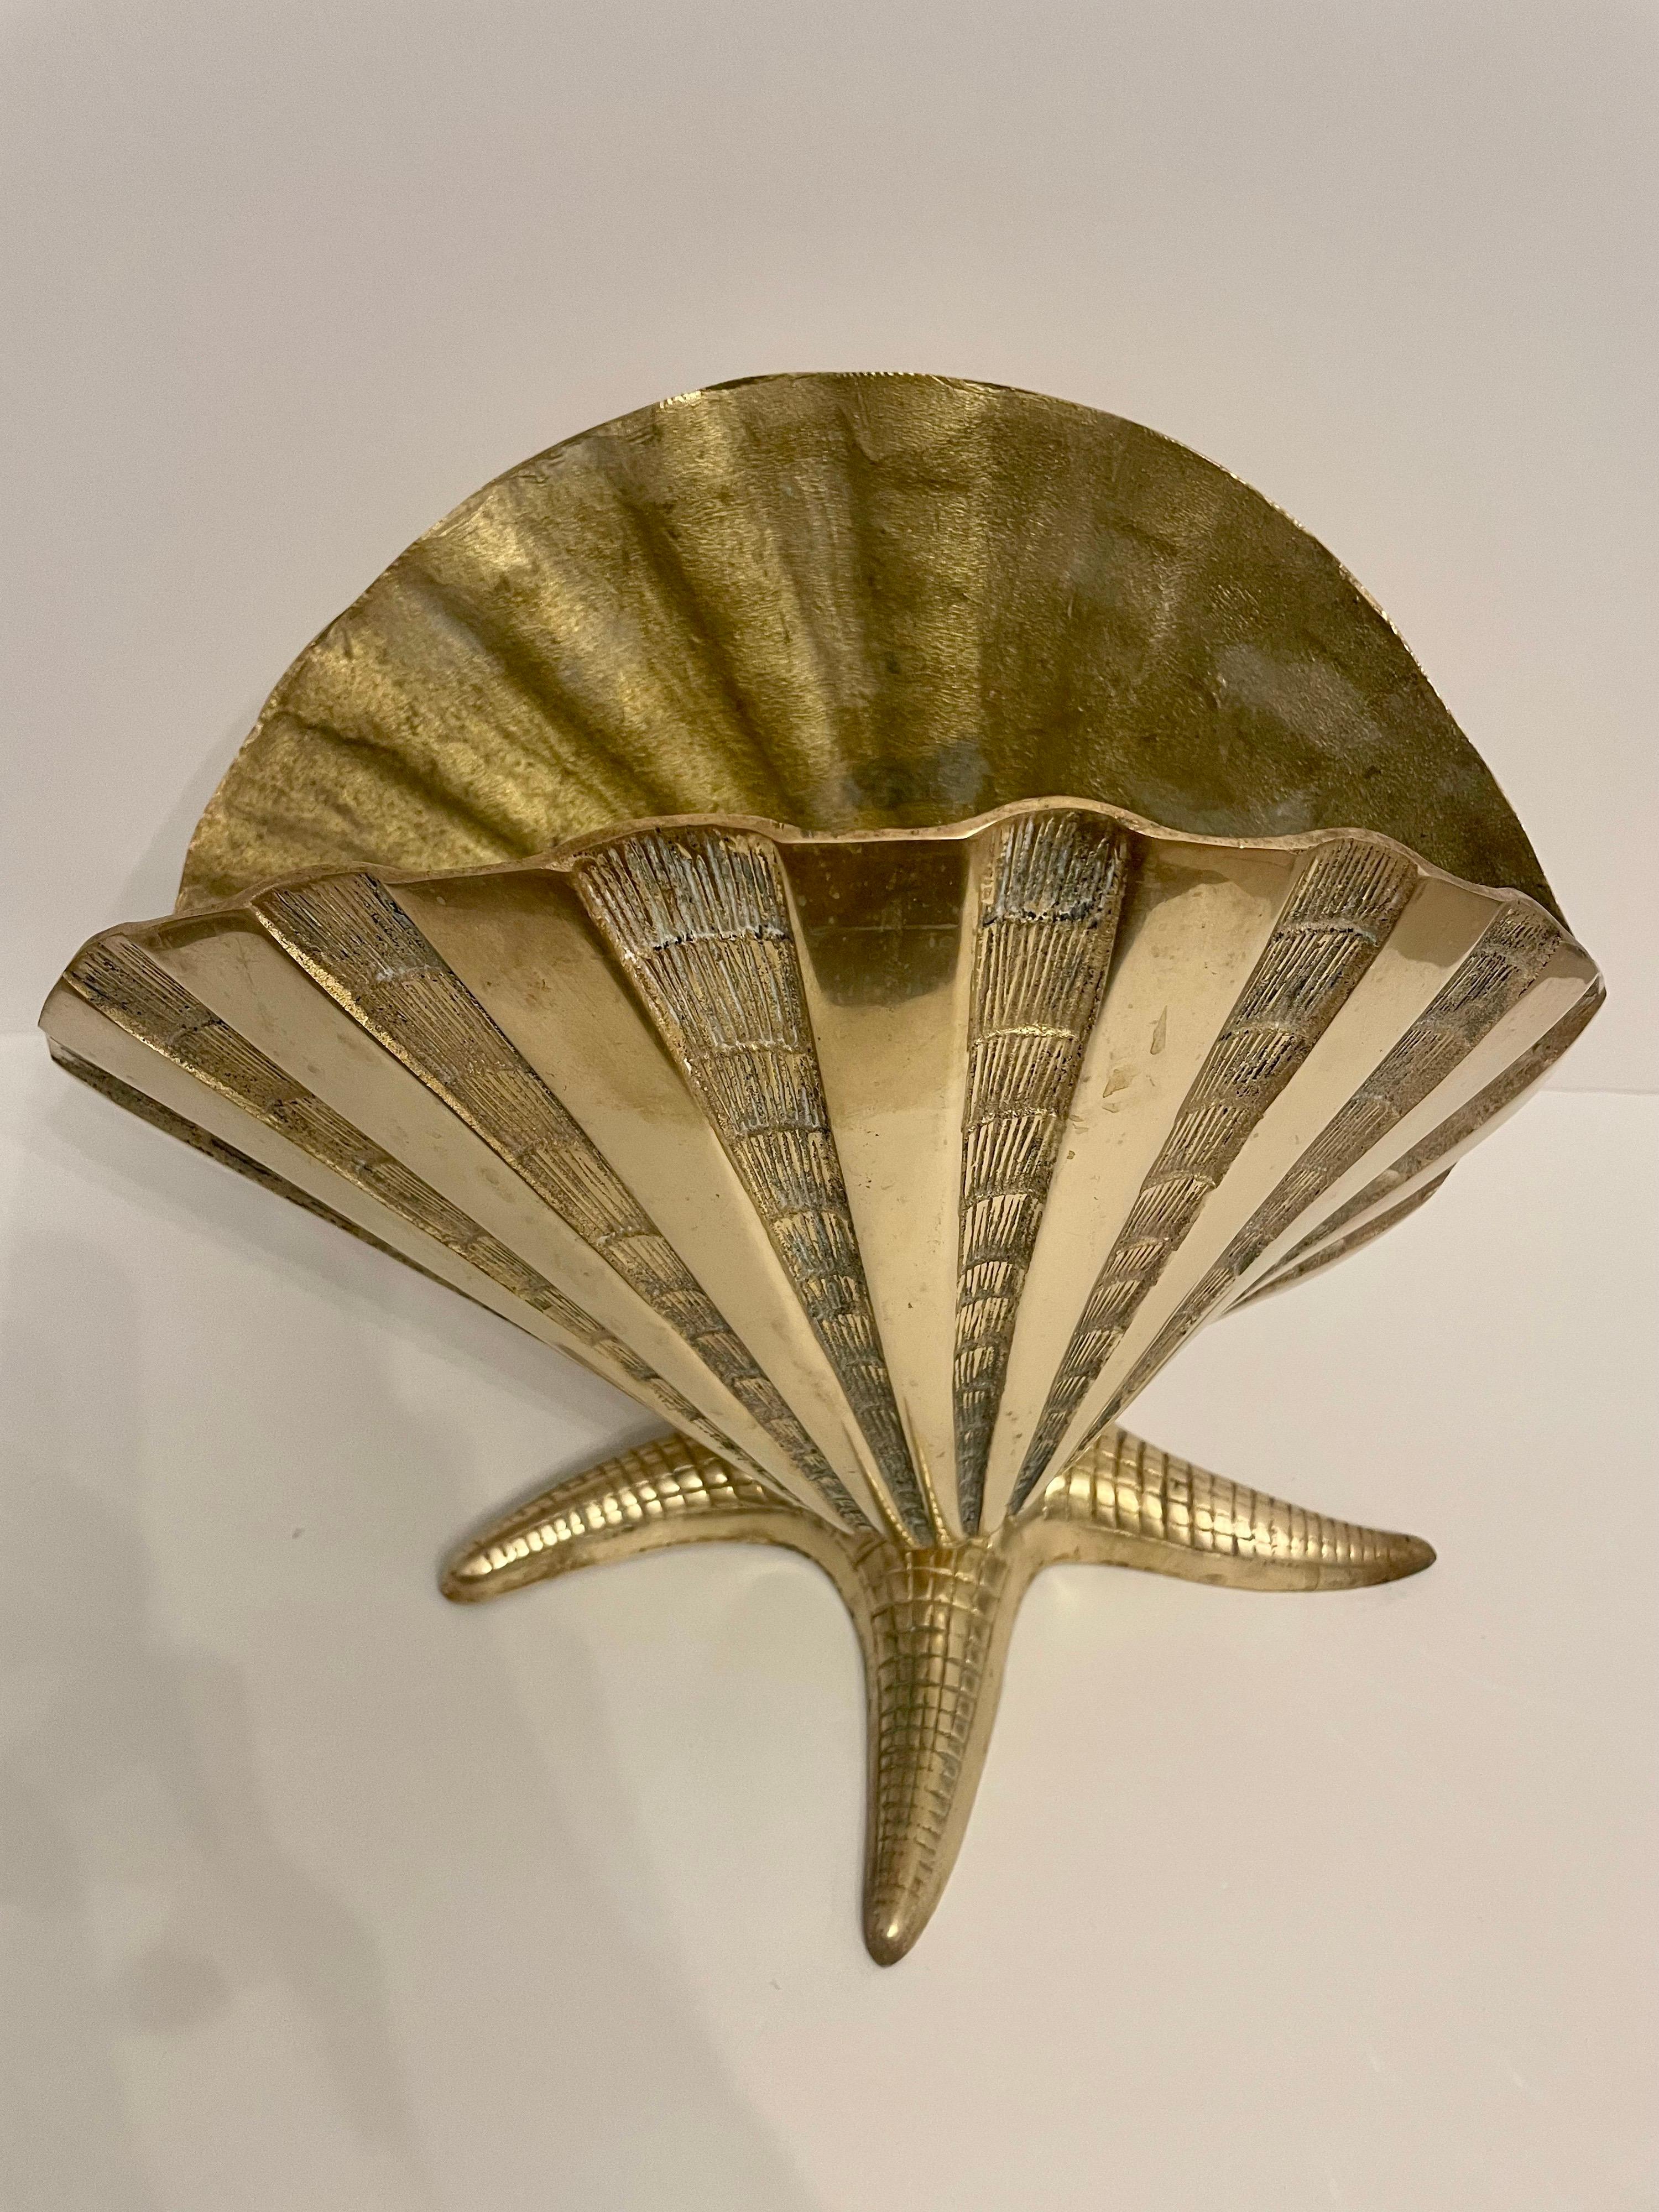 Giant Brass Nautical Clam Shell seashell on starfish base sculpture. Nice vintage condition, hand polished. Heavy with nice details in the casting. Any dark spots in photos is light reflection.